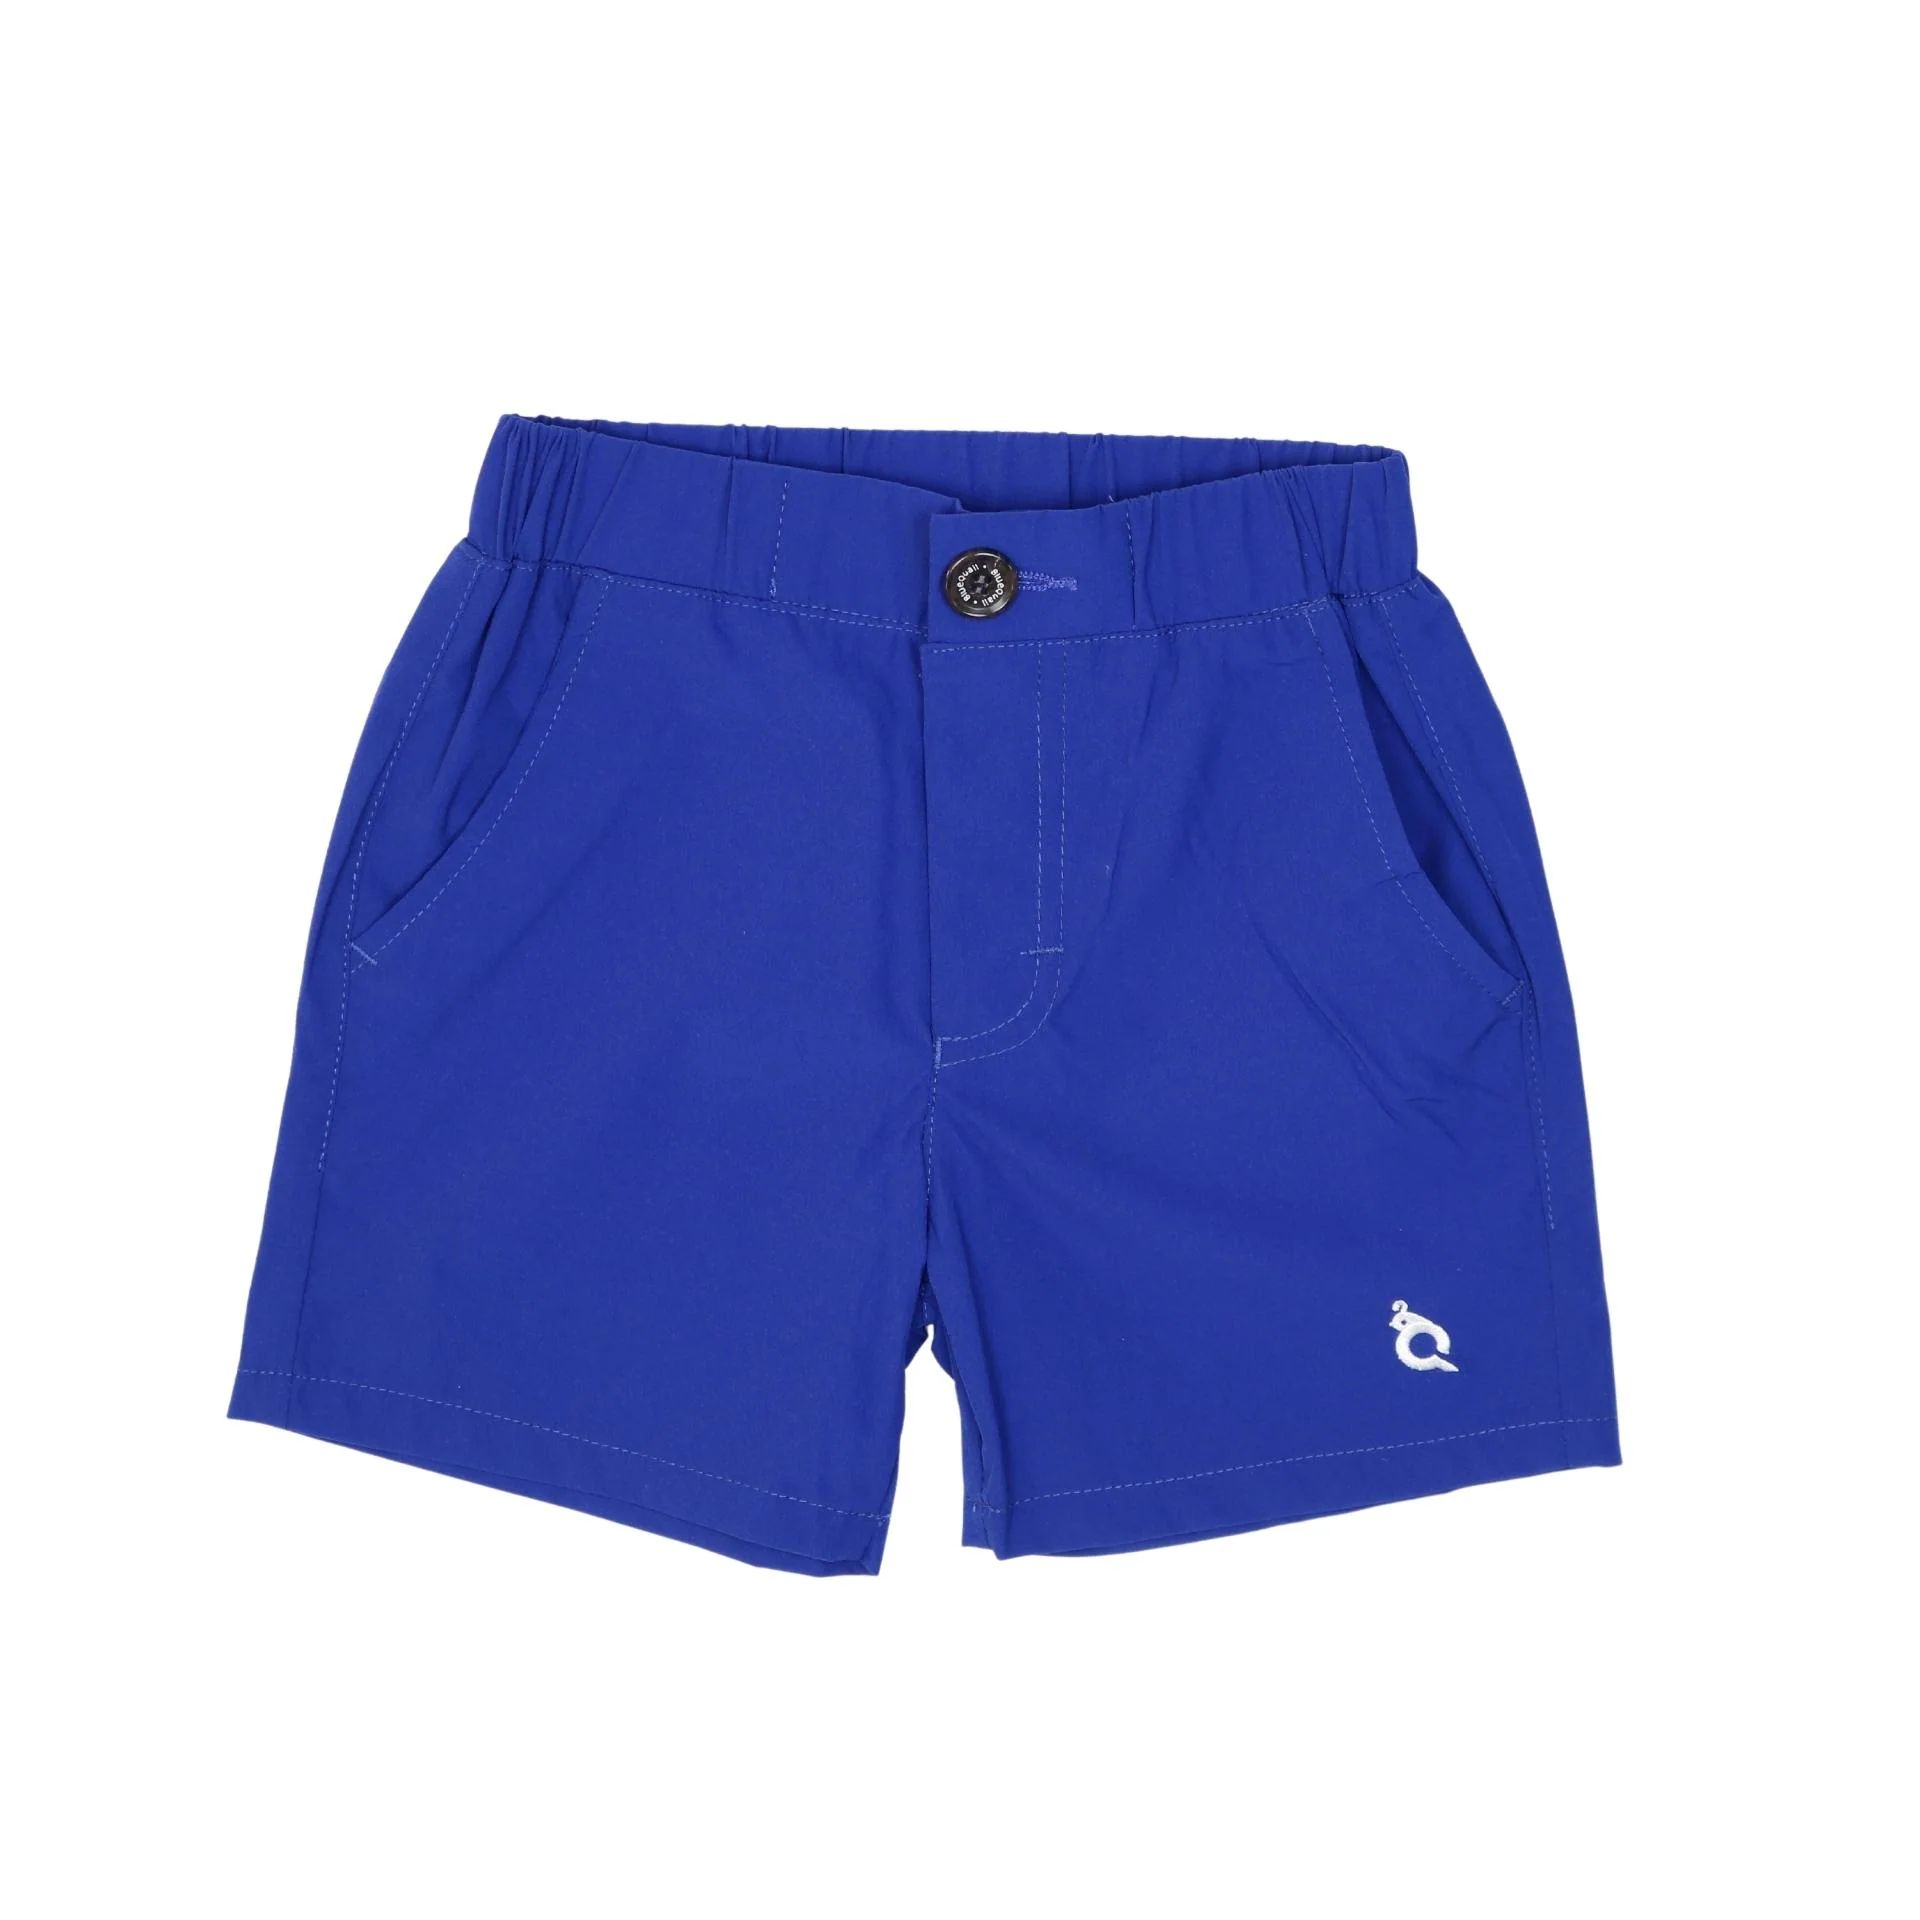 Navy Blue Shorts - Everyday Collection | Blue Quail Clothing Co. | BlueQuail Clothing Co.